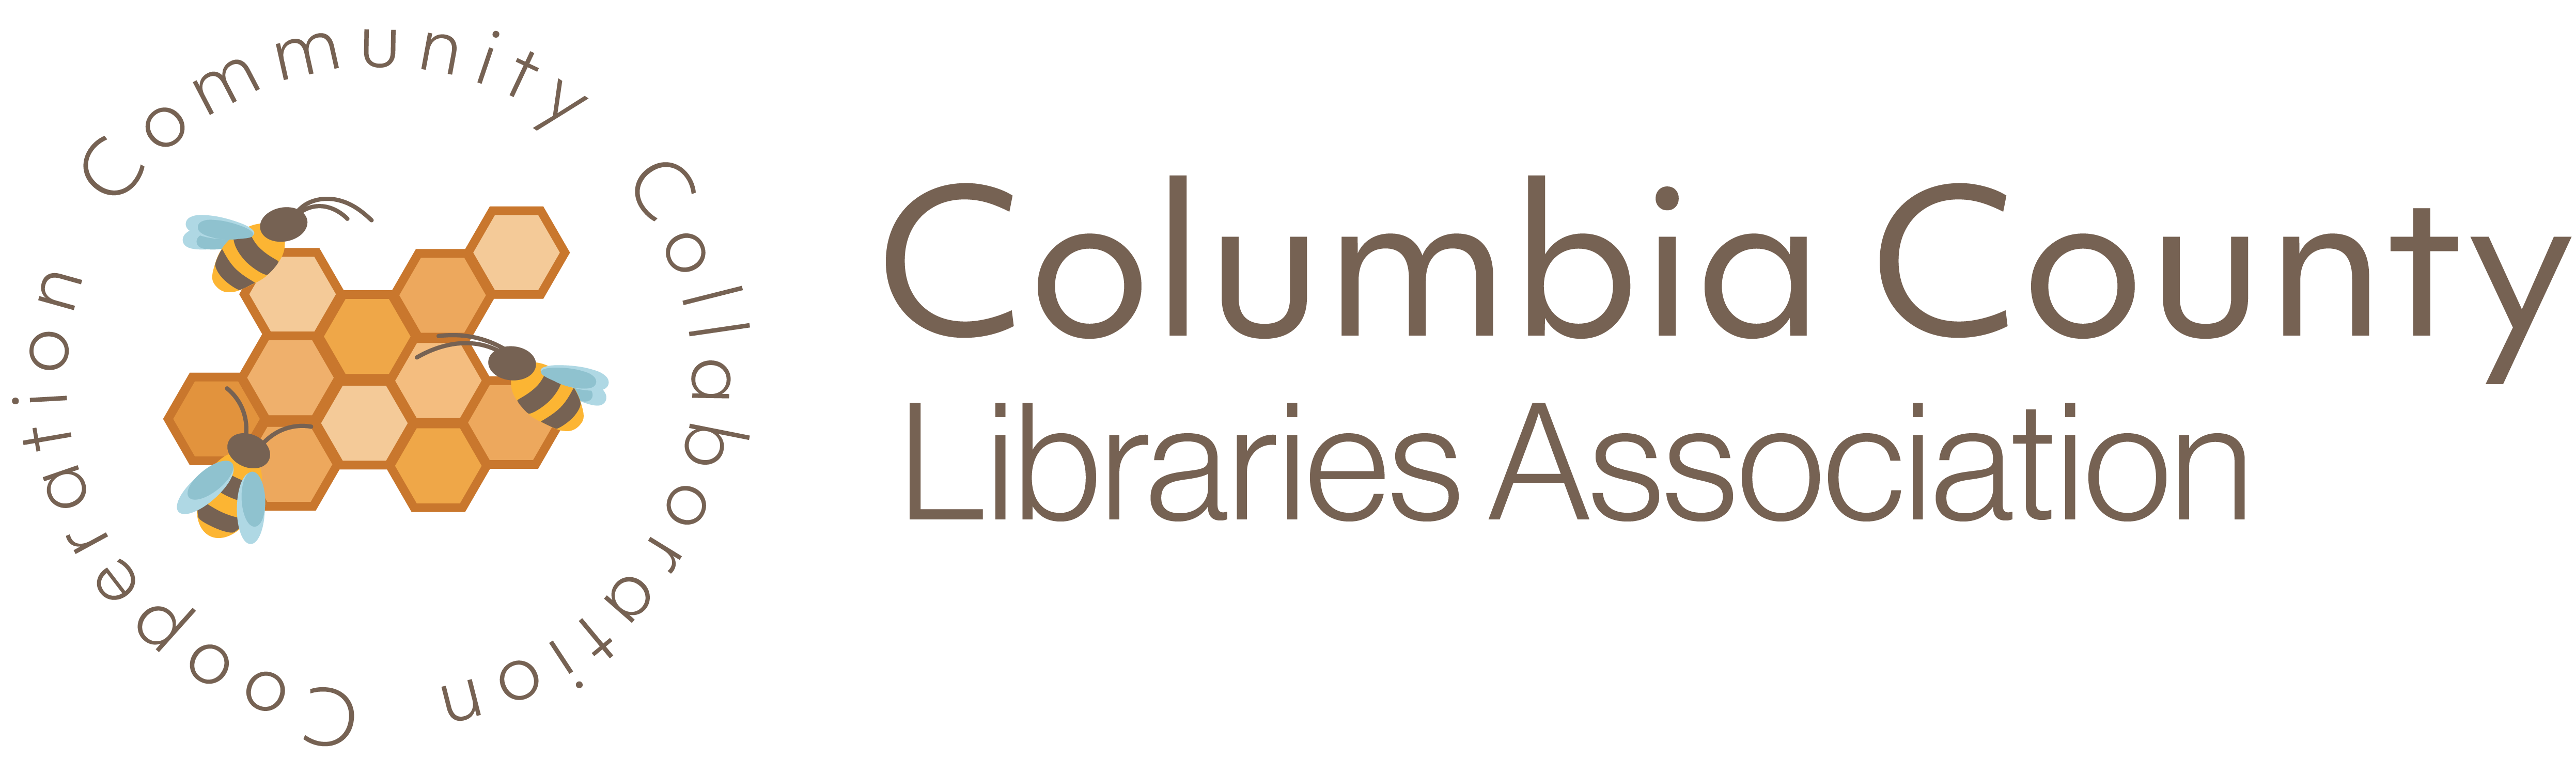 Columbia County Library Association